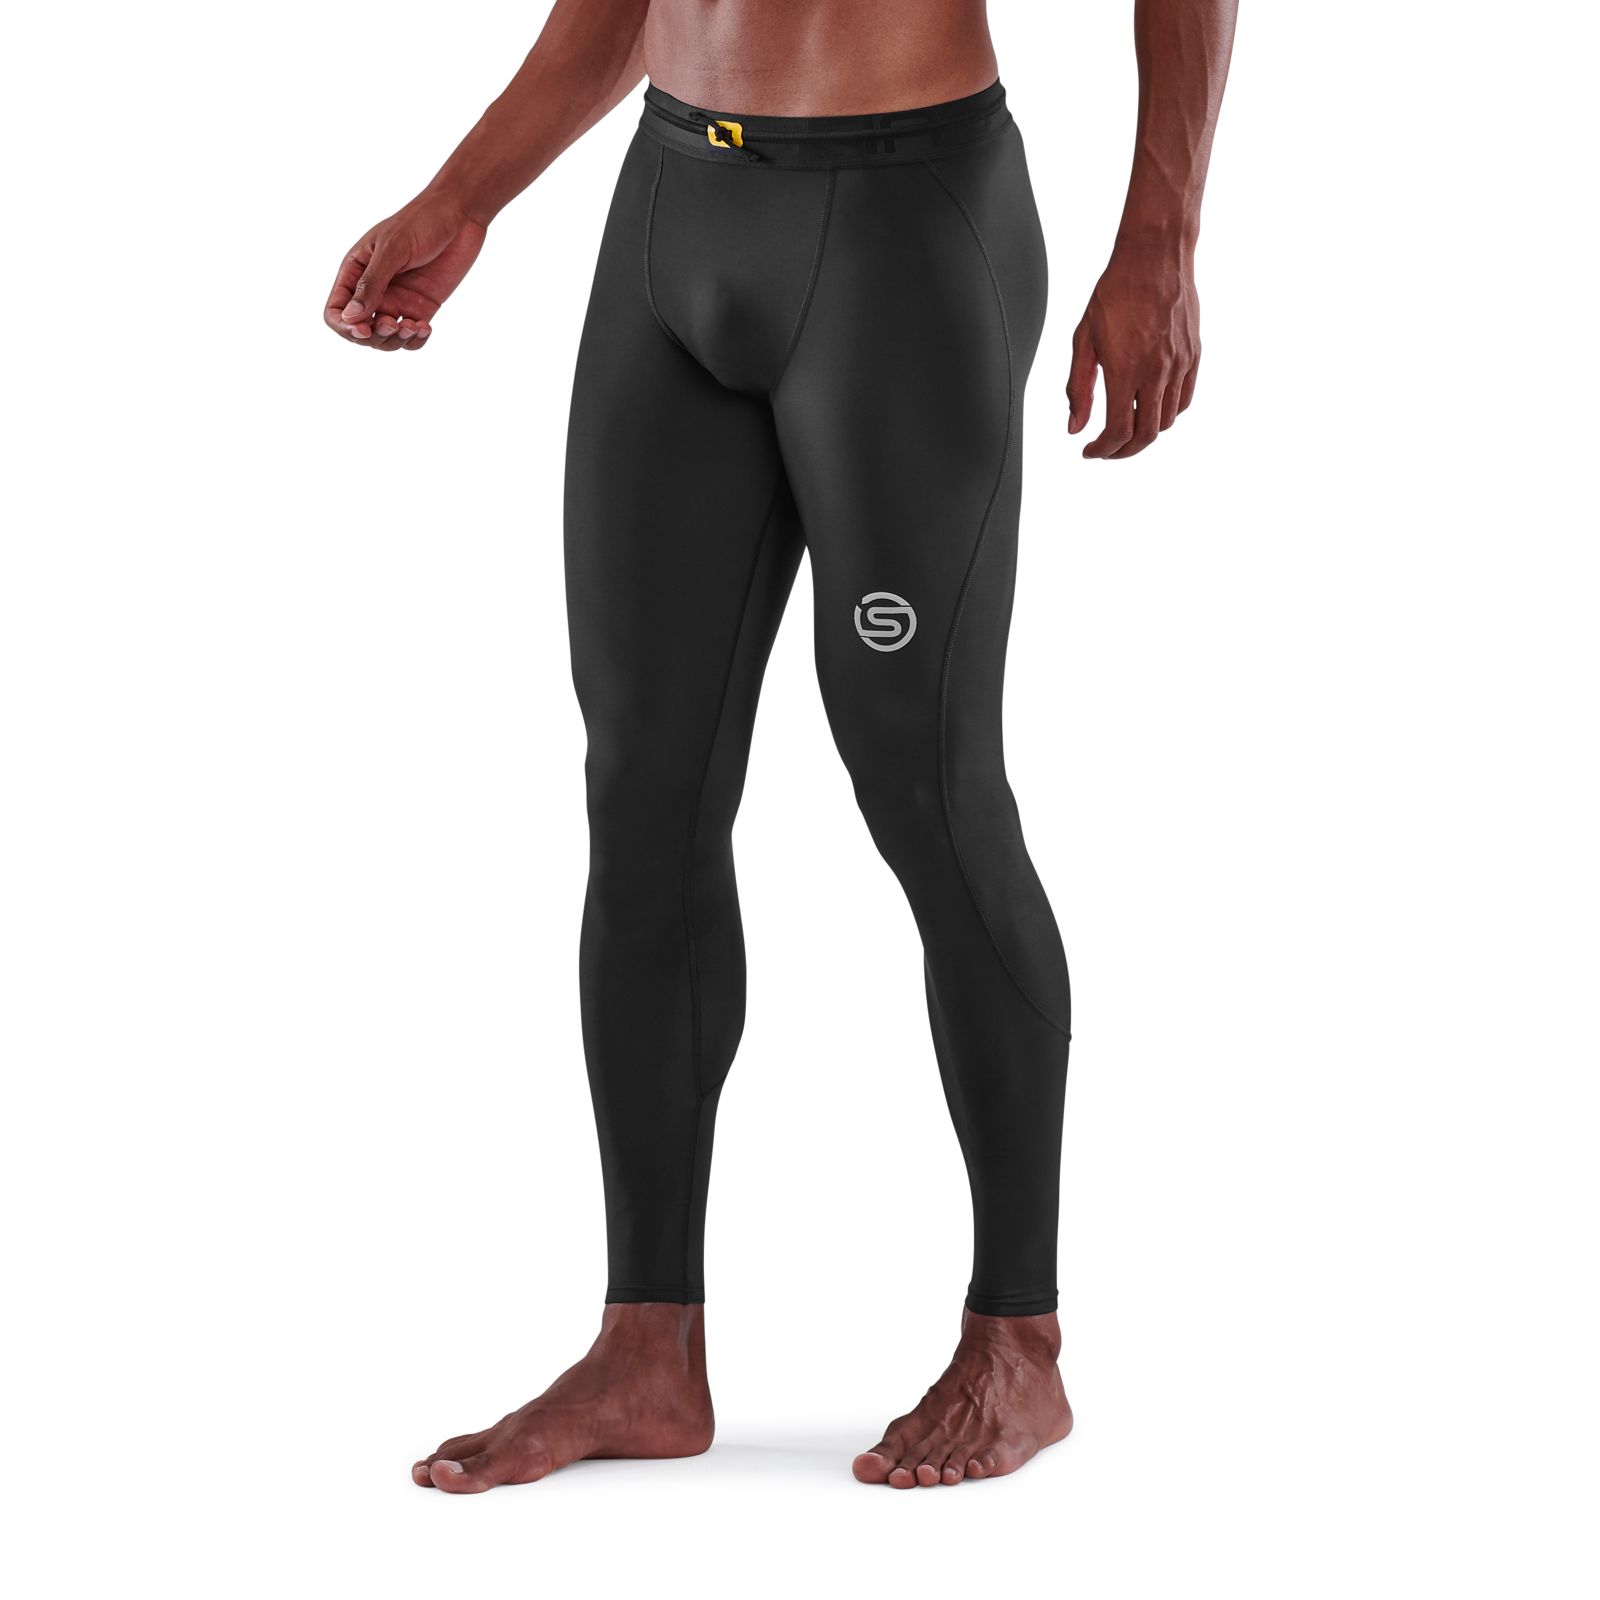 TRAVEL Compression BLACK SKINS TIGHTS SERIES-3 LONG MEN\'S - SKINS AND RECOVERY USA